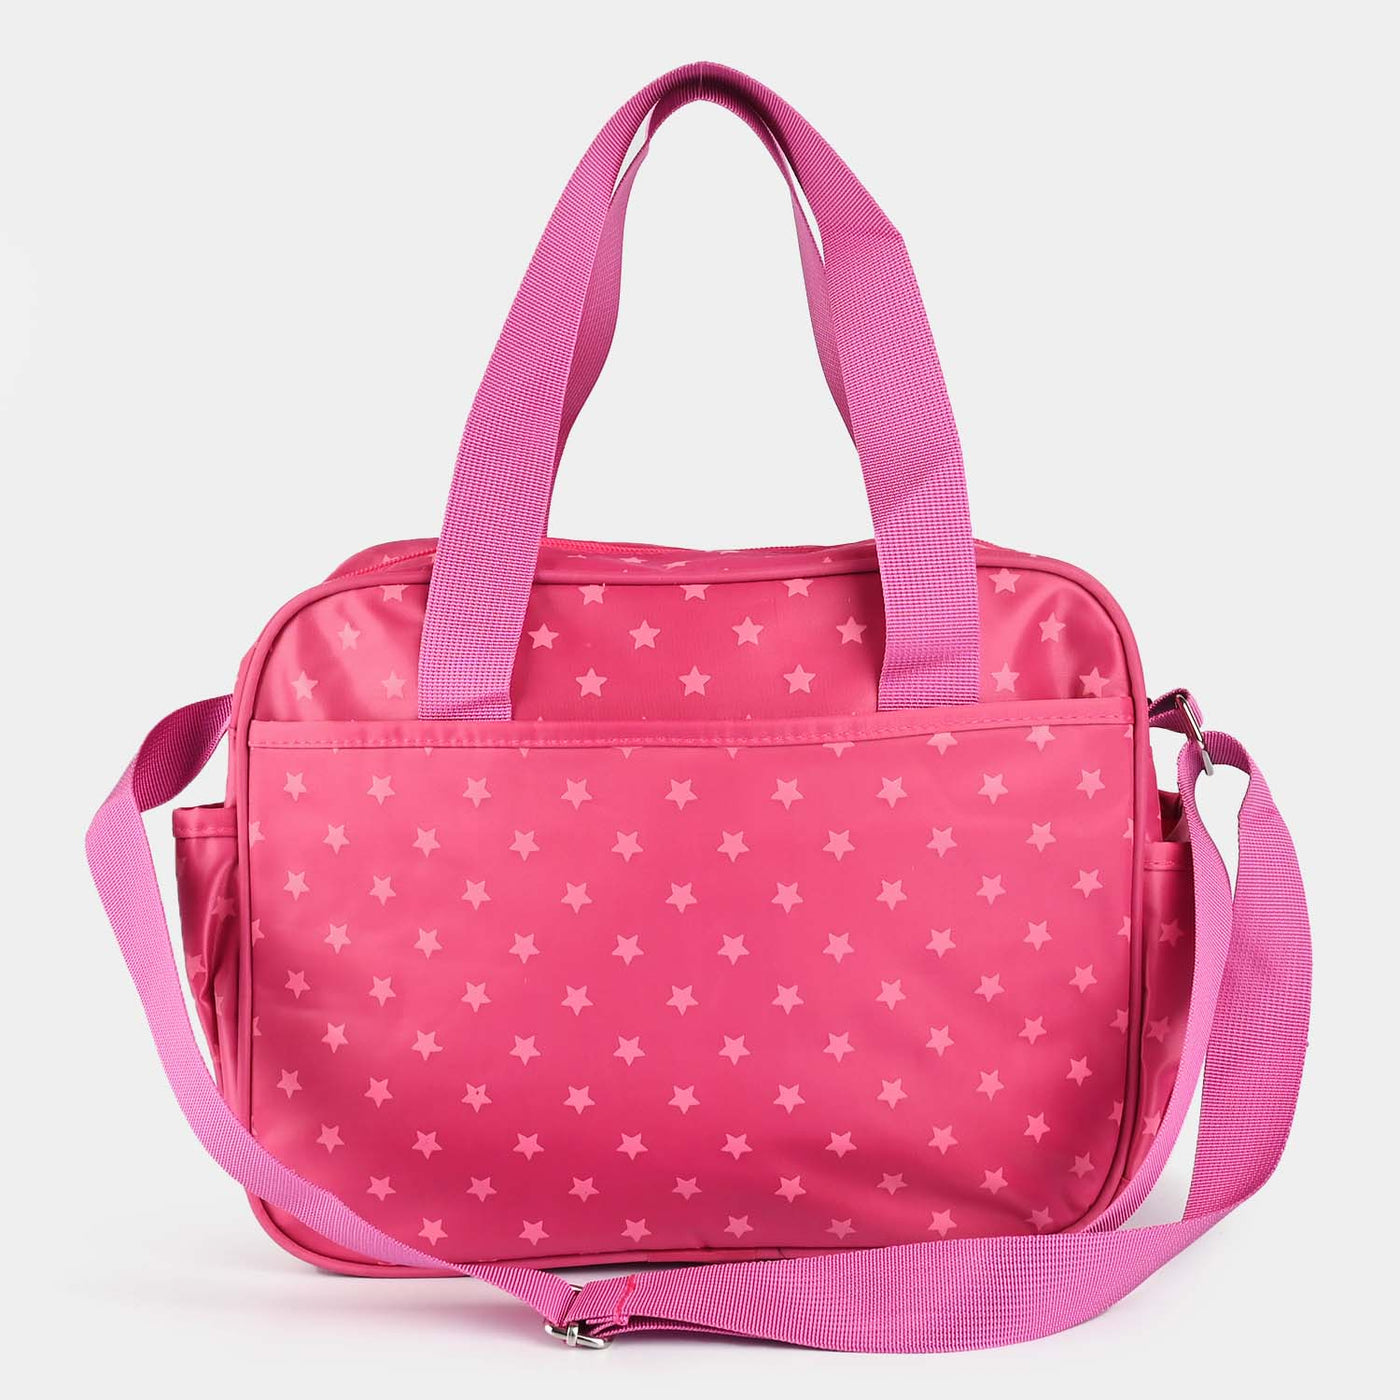 MOTHER TRAVEL SMALL BABY DIAPER BAG